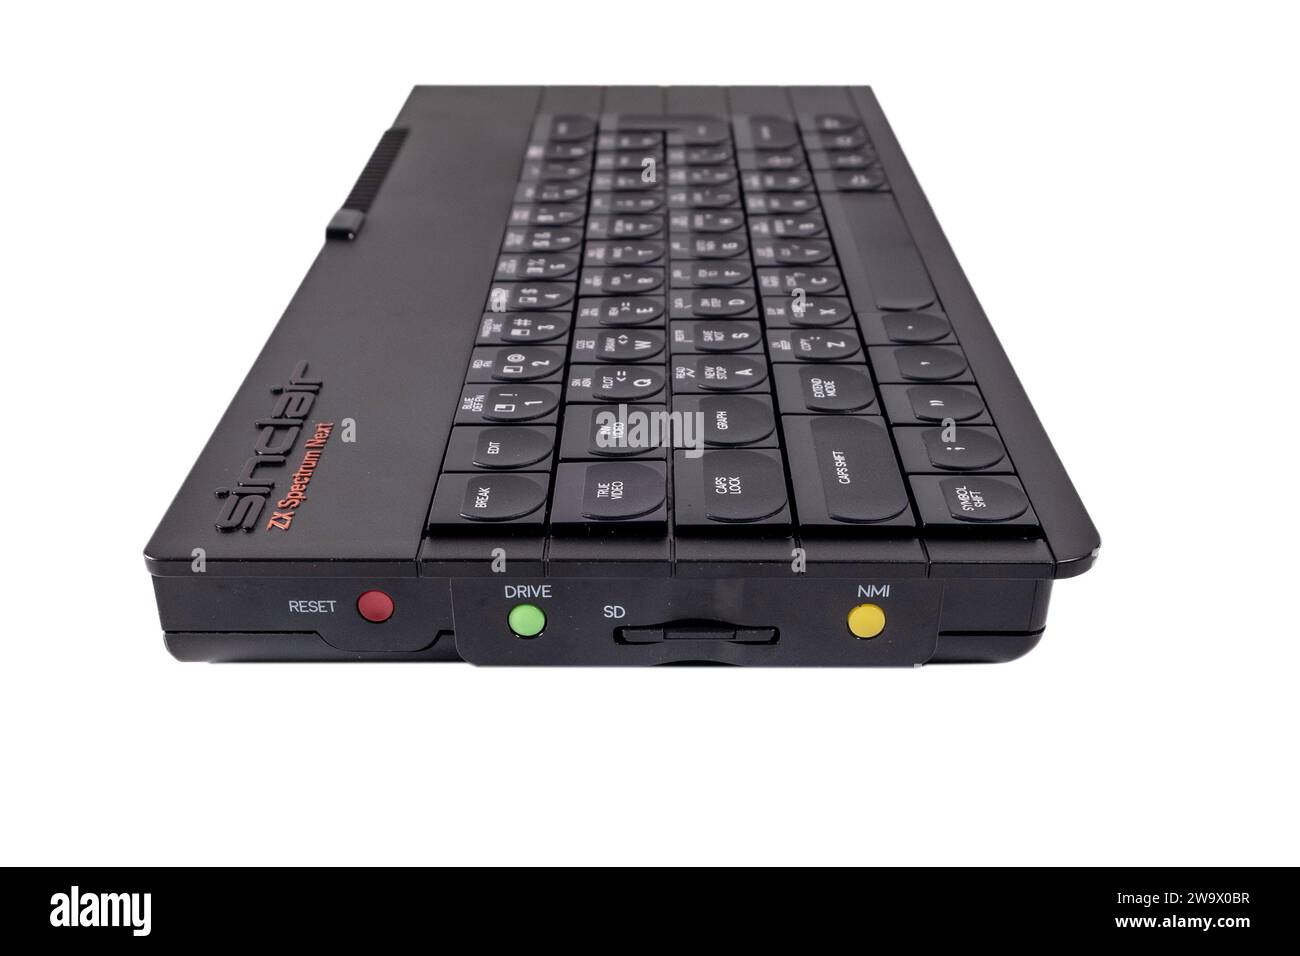 Sinclair Spectrum Next is a computer hardware project that is a reimplementation of the original ZX Spectrum home computer. Stock Photo